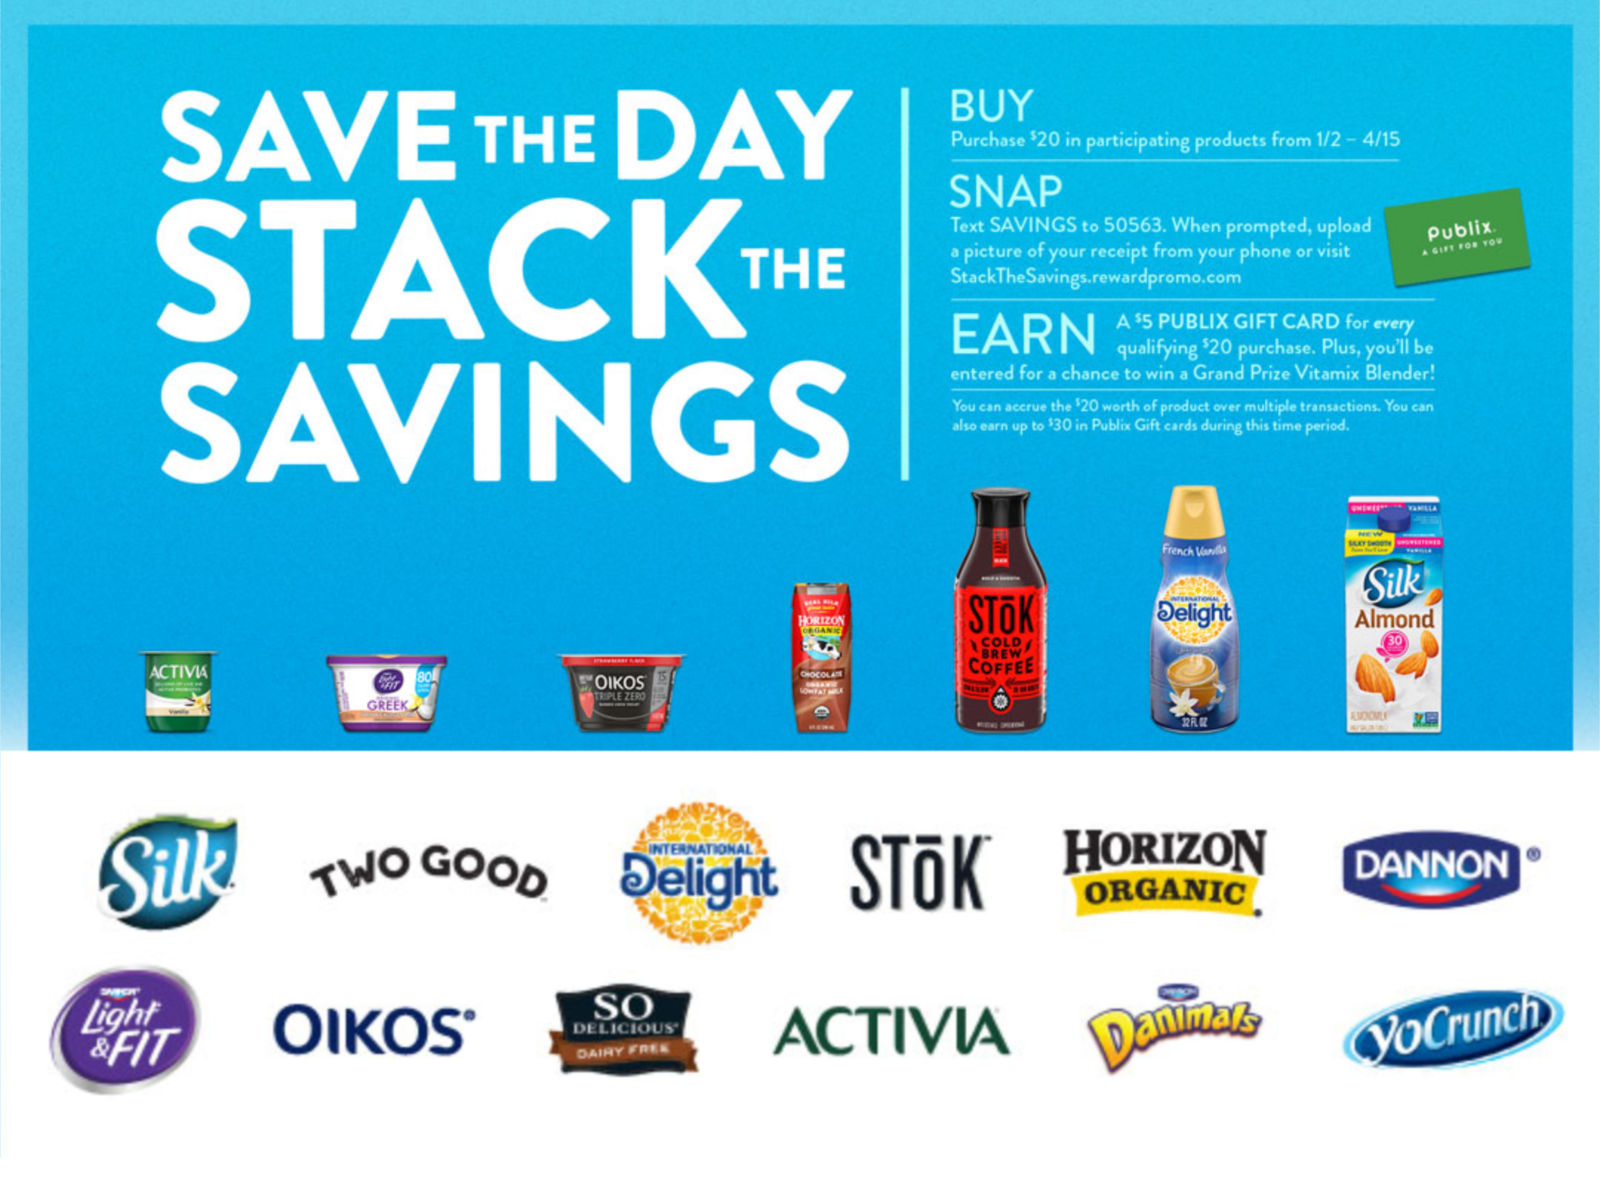 New Deals To Earn Your Save The Day Stack The Savings Rebate Gift Card(s)